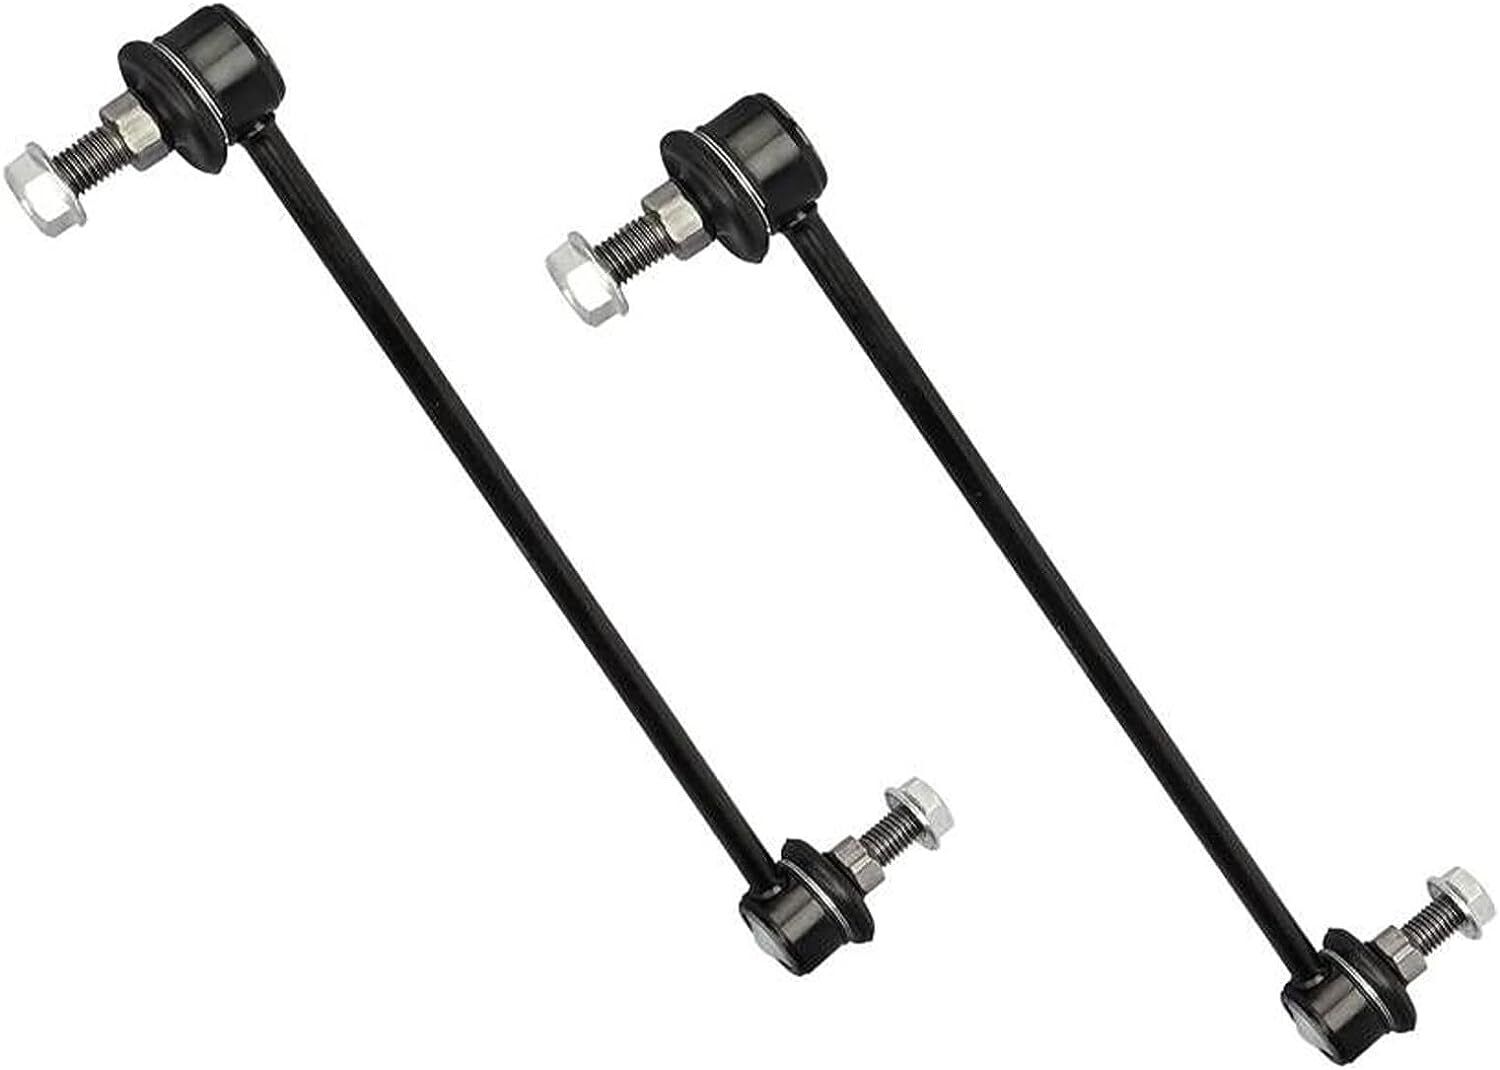 Set of 2 Front Stabilizer Sway Bar End Links for Ford Focus 2012-2018